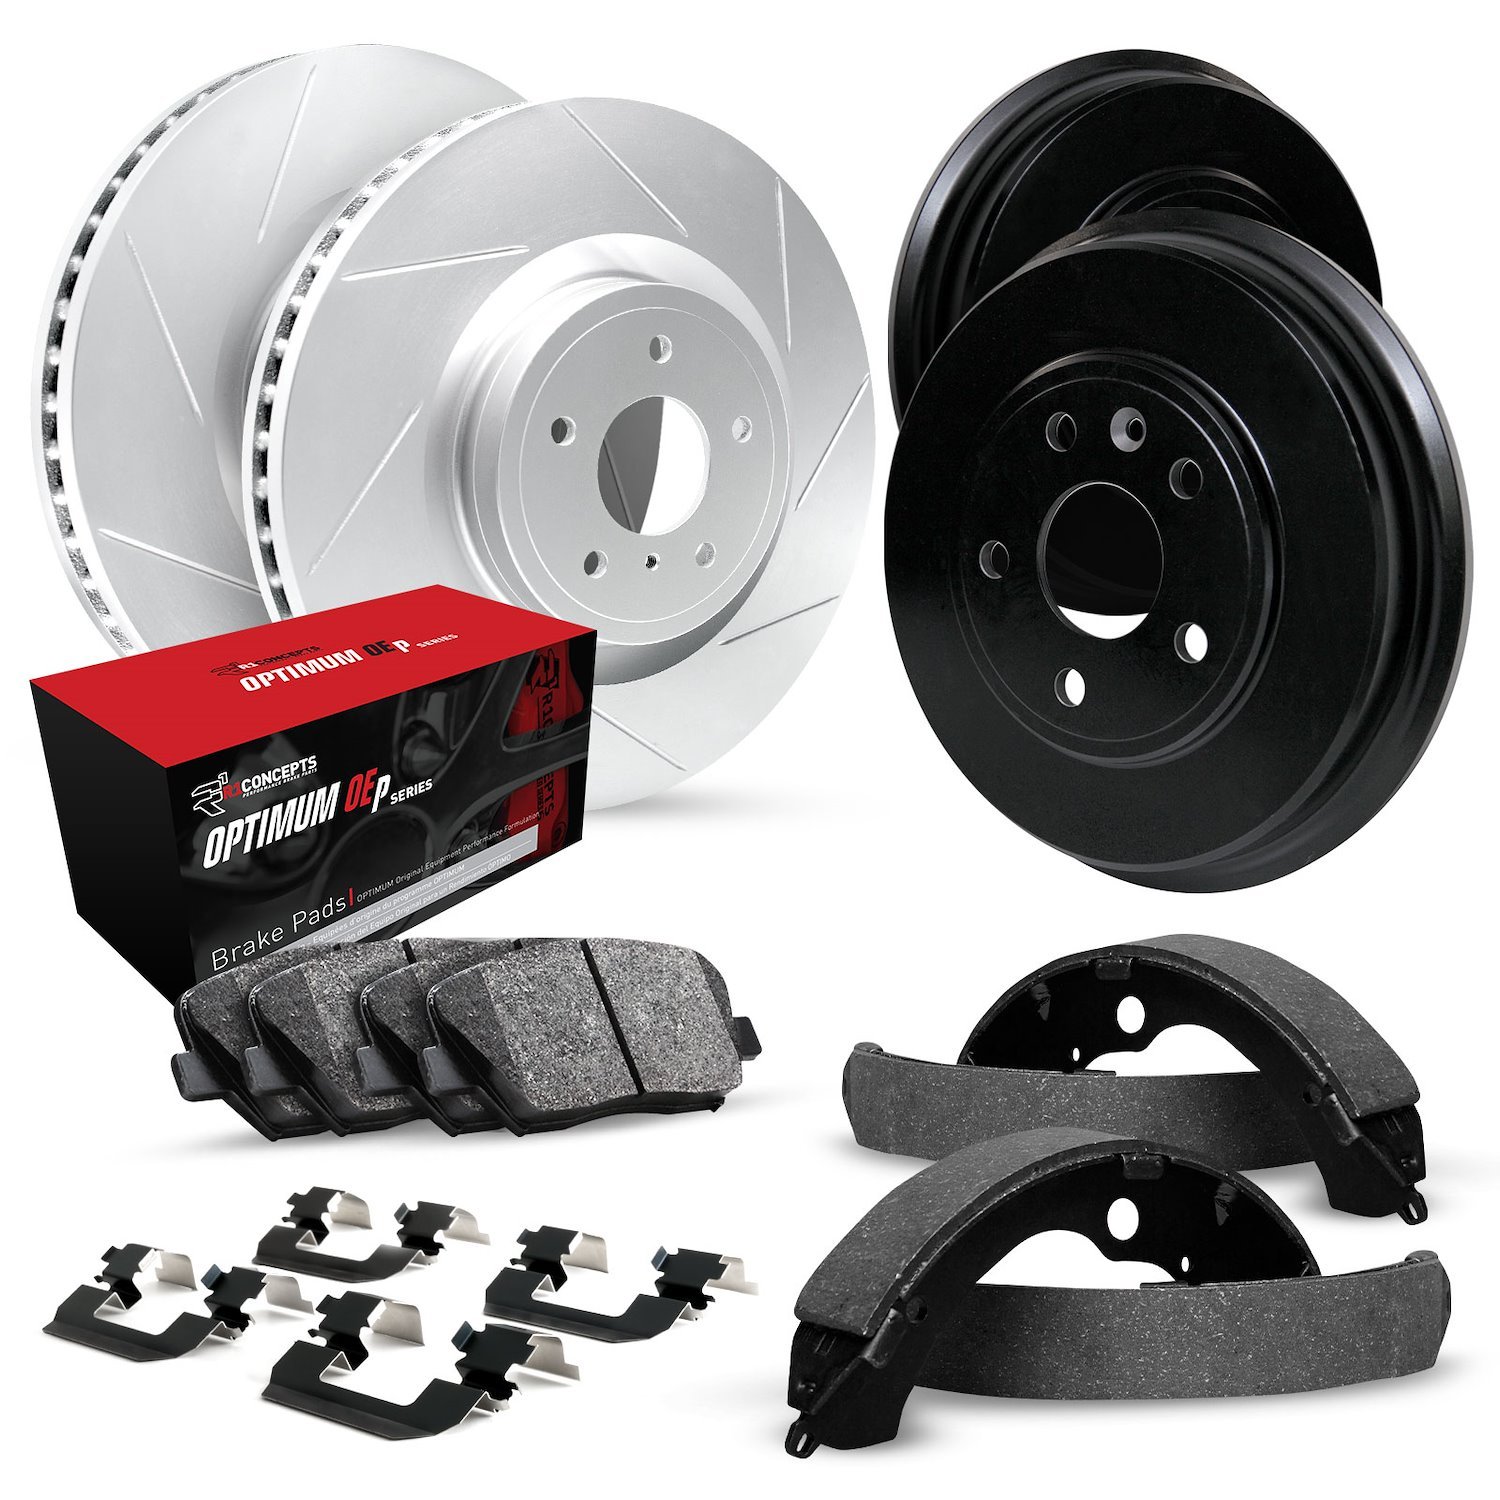 GEO-Carbon Slotted Brake Rotor & Drum Set w/Optimum OE Pads, Shoes, & Hardware, 1969-1972 GM, Position: Front & Rear